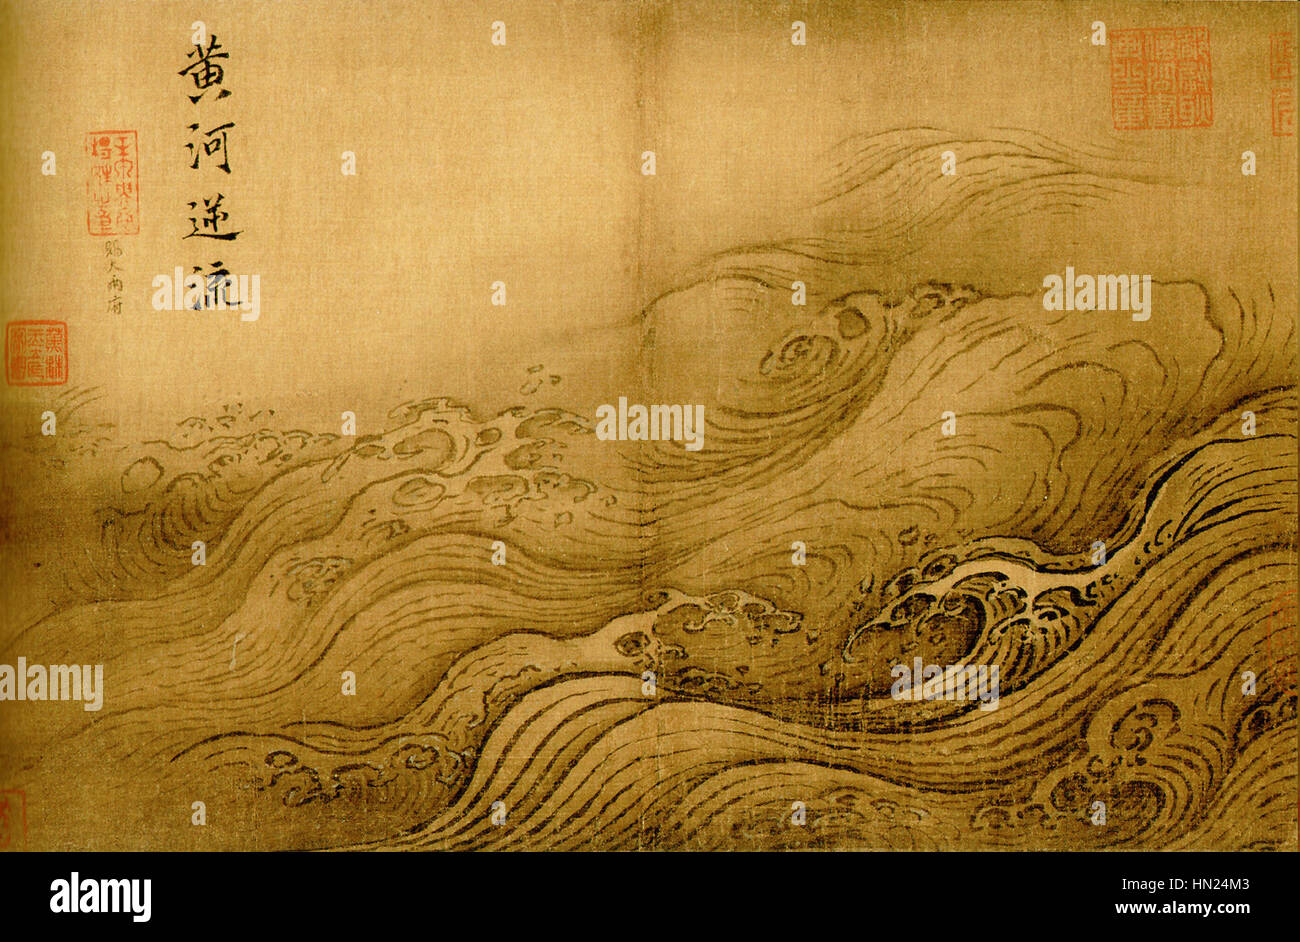 Ma Yuan - Water Album - The Yellow River Breaches its Course Stock Photo